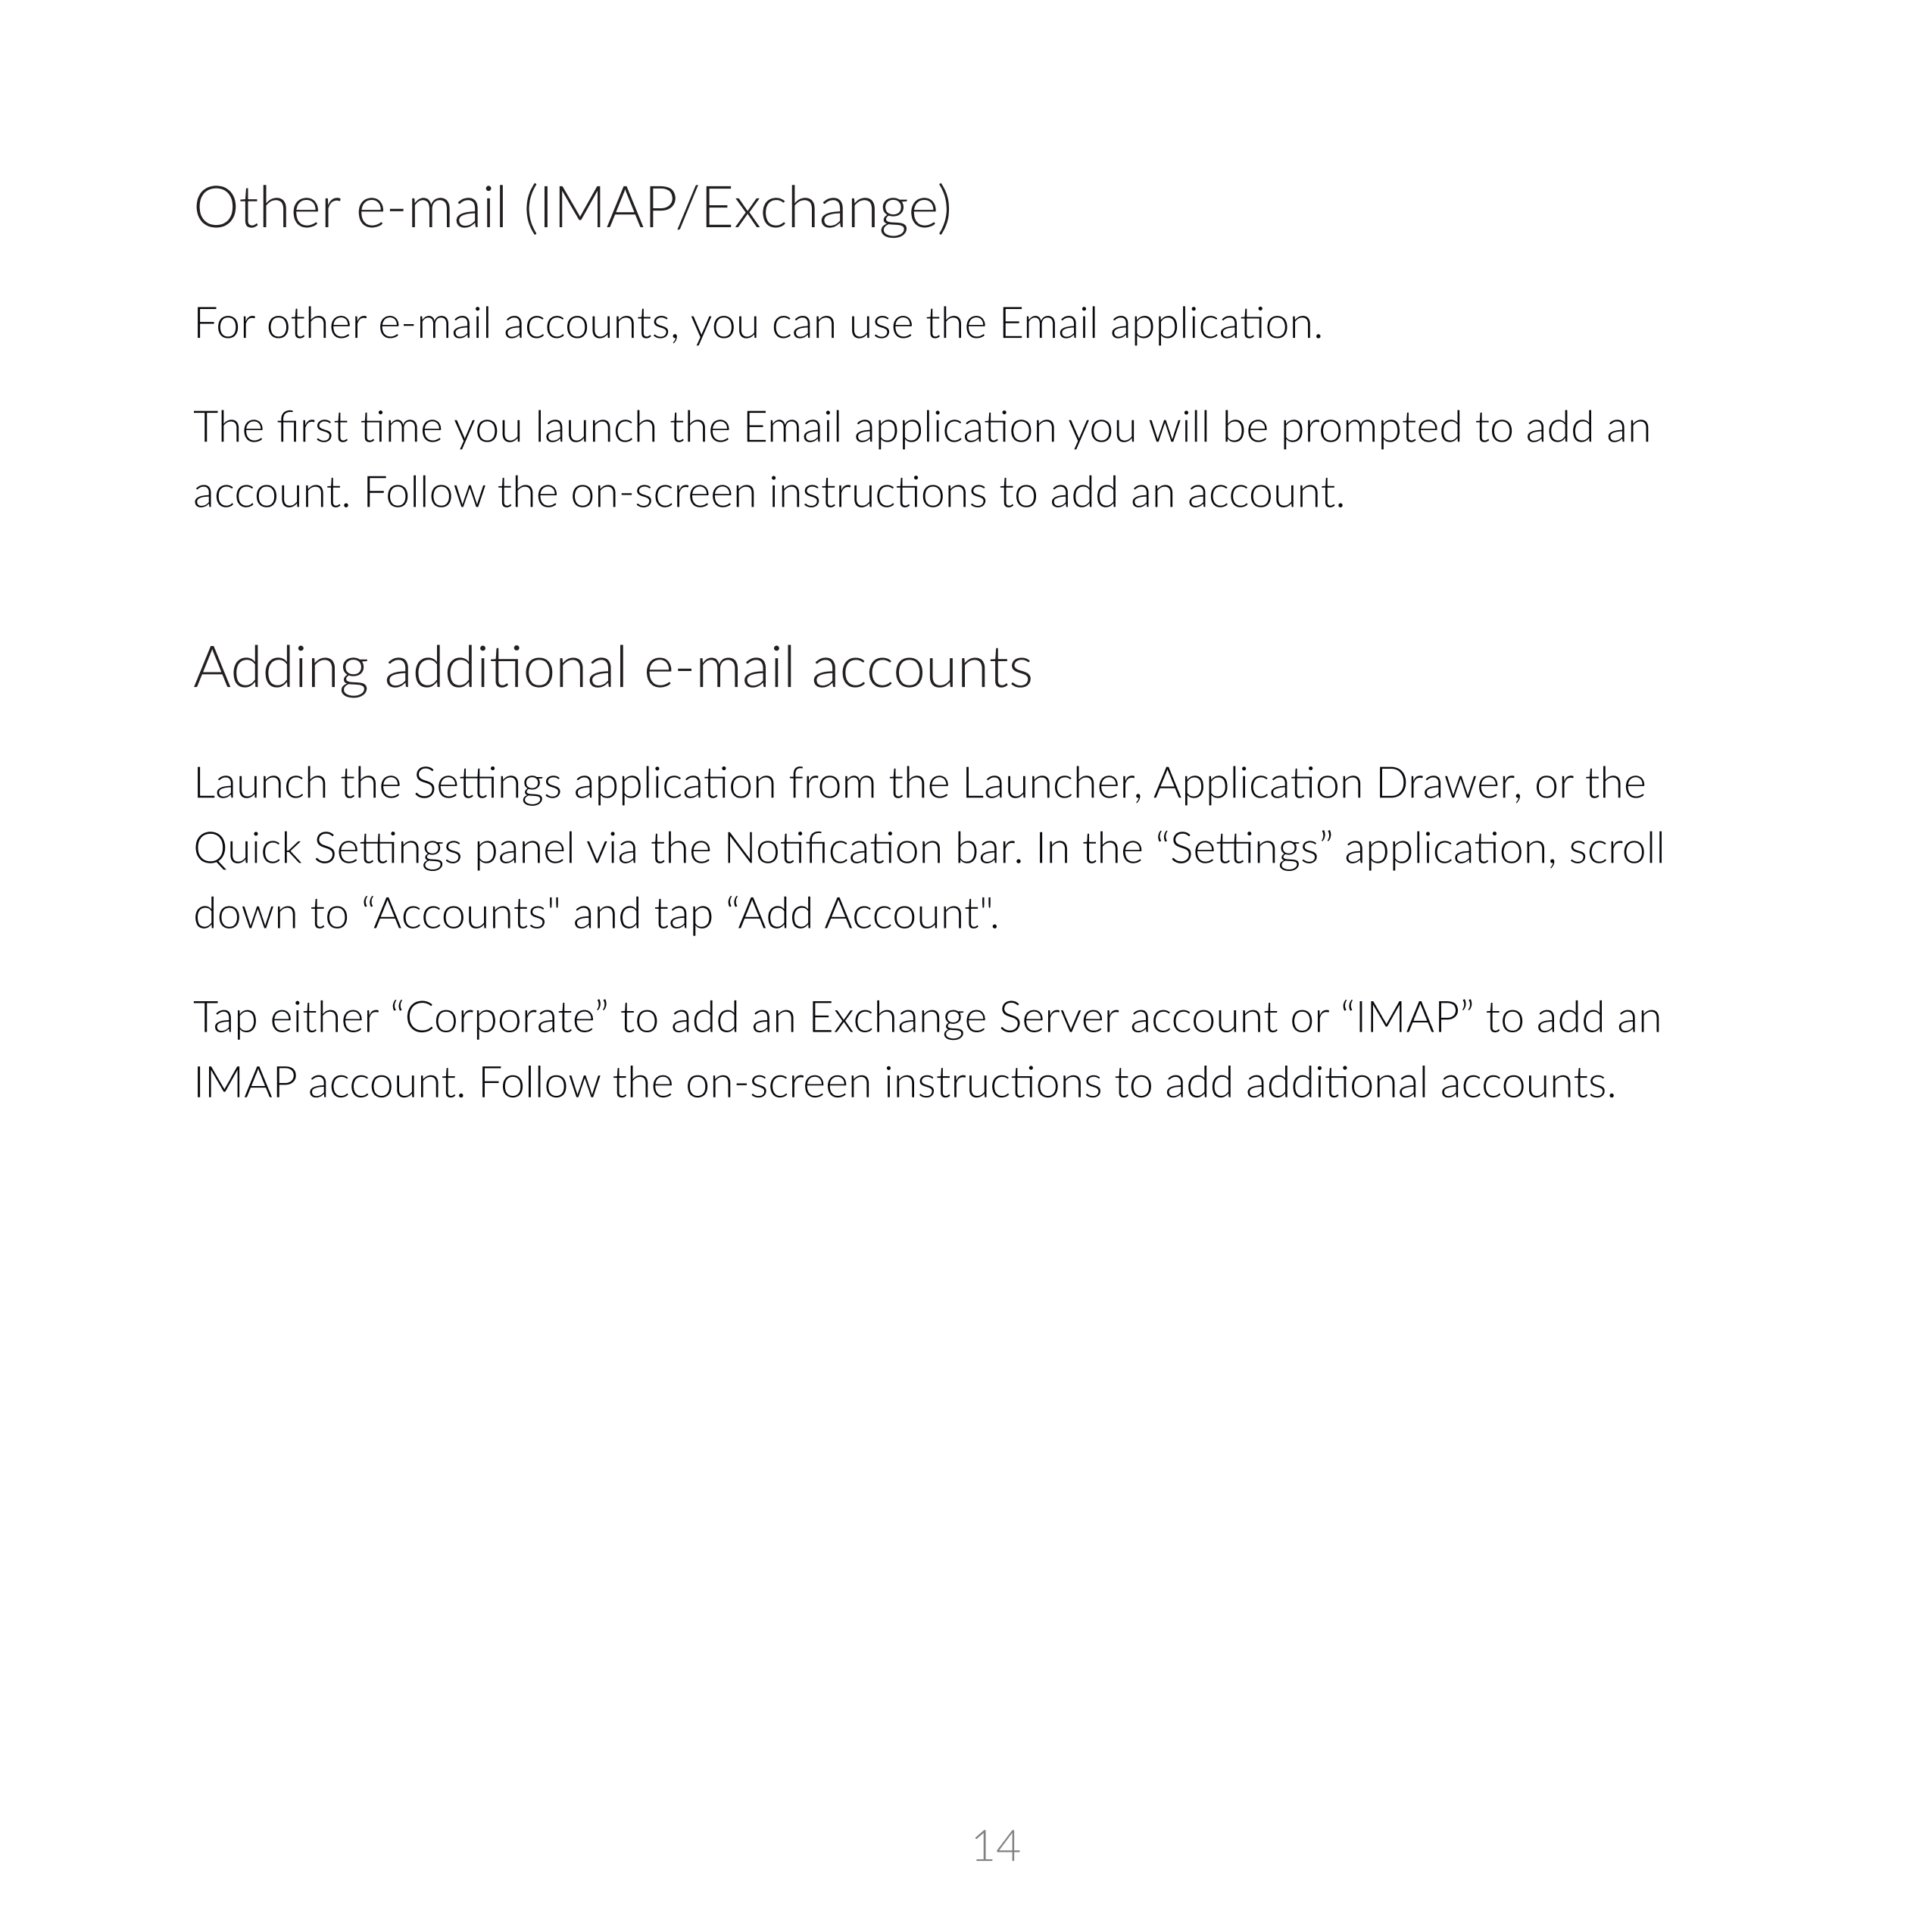 Other e-mail (IMAP/Exchange)
down to  “Accounts" and tap  “Add  Account". 
Tap either “Corporate” to add an Exchange  Server acc